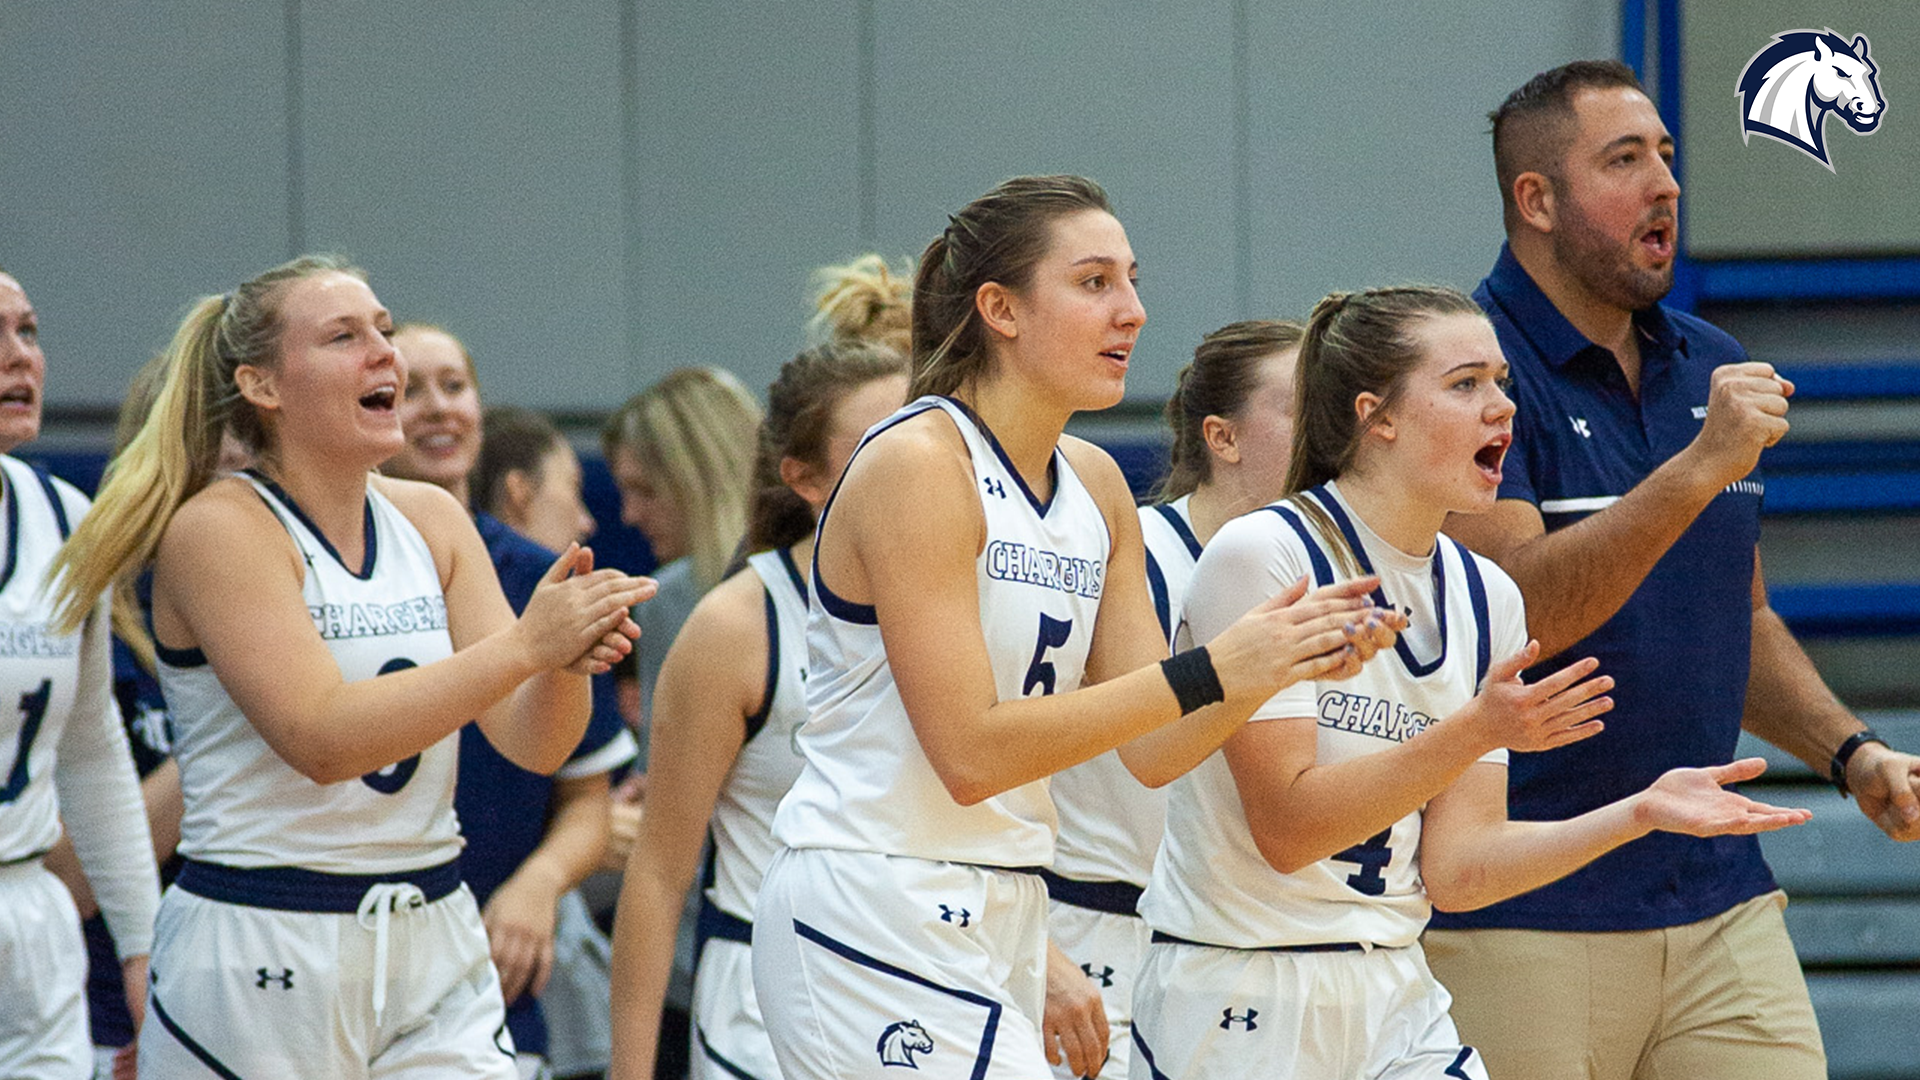 Winter Recap: Chargers women's basketball team breaks through with winning record, postseason appearance